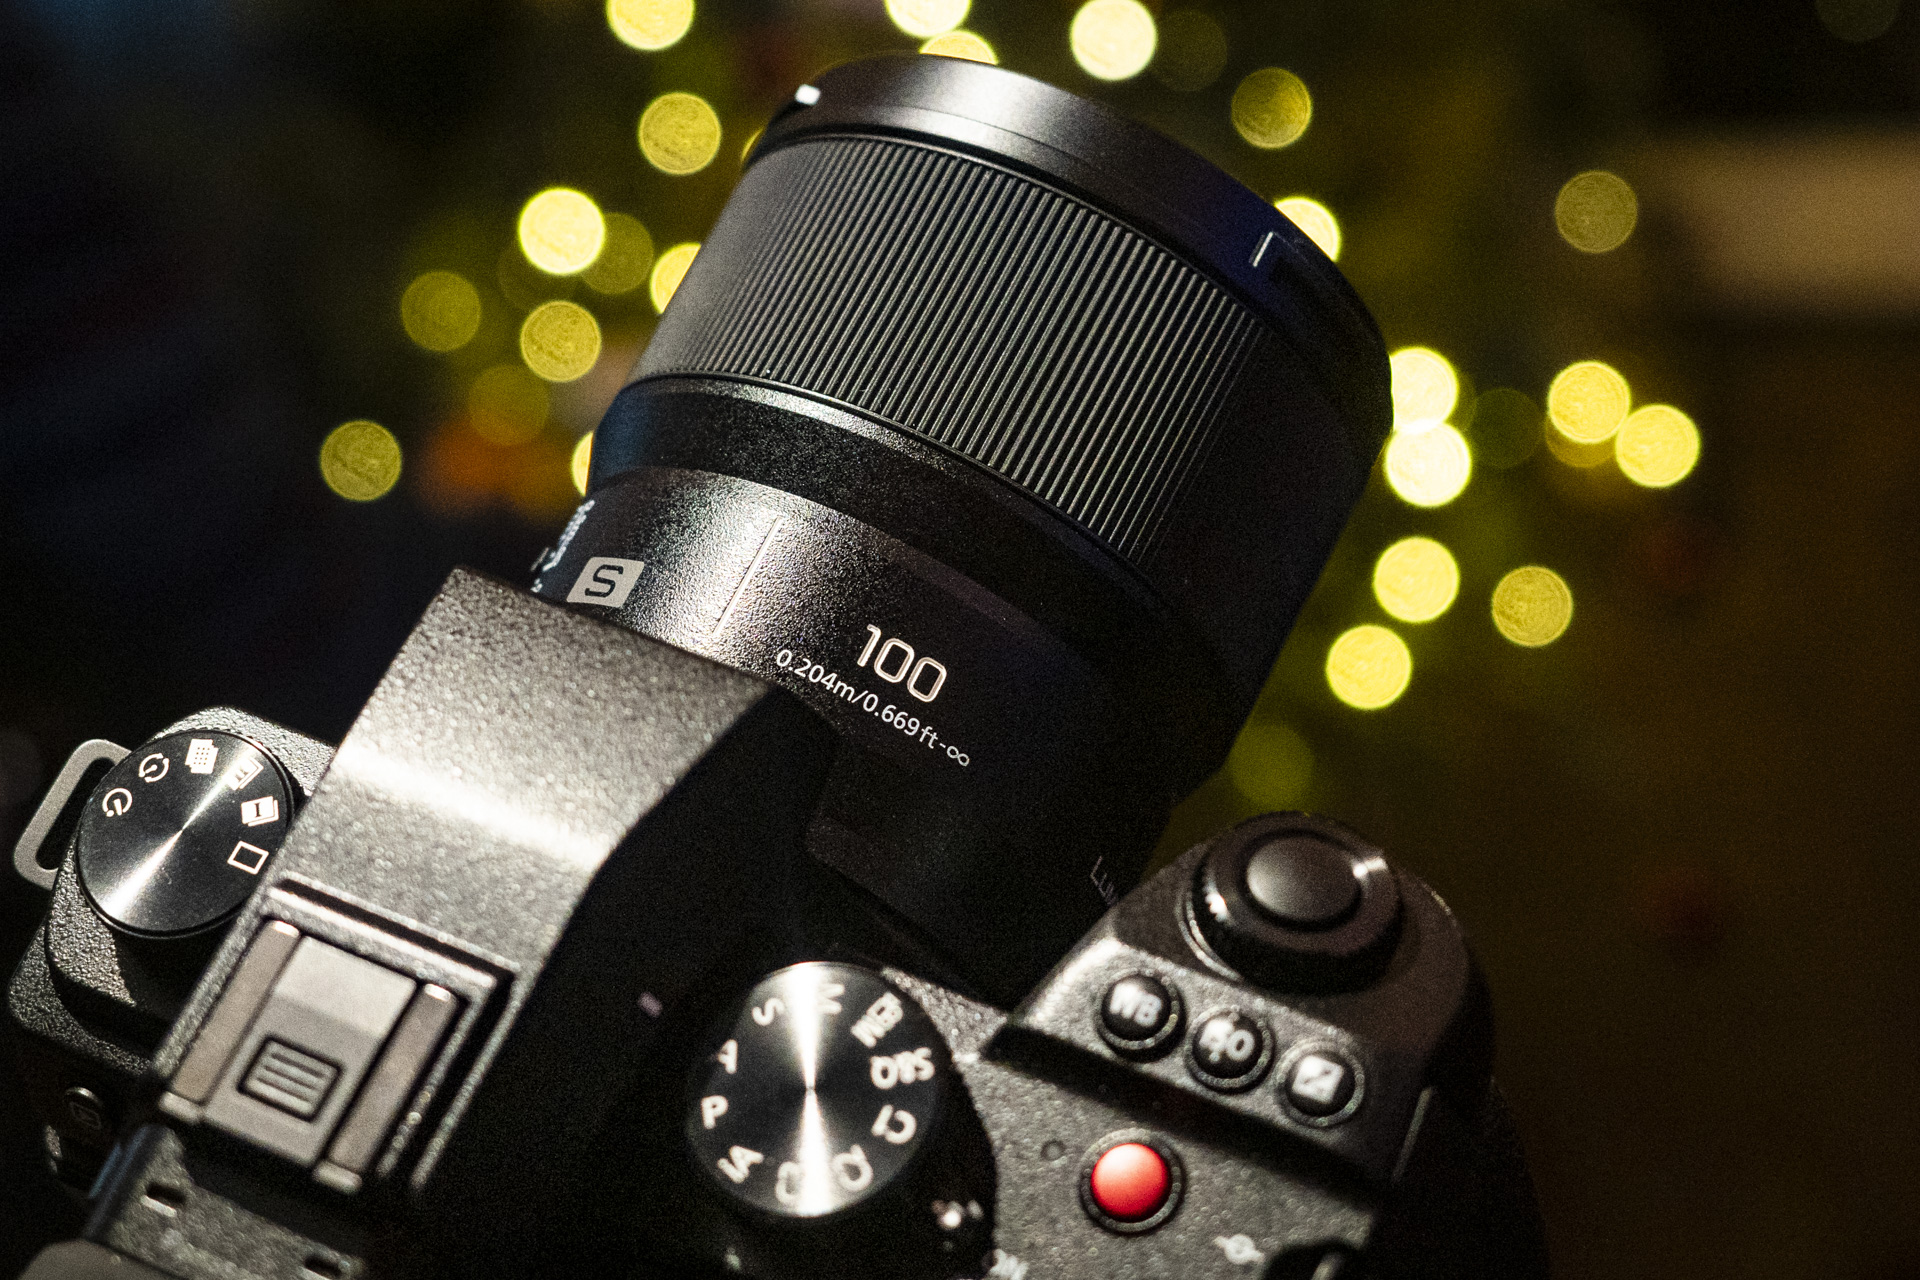 Panasonic Lumix S 100mm F2.8 Macro lens attached to a Lumix S5 II with Christmas lights behind